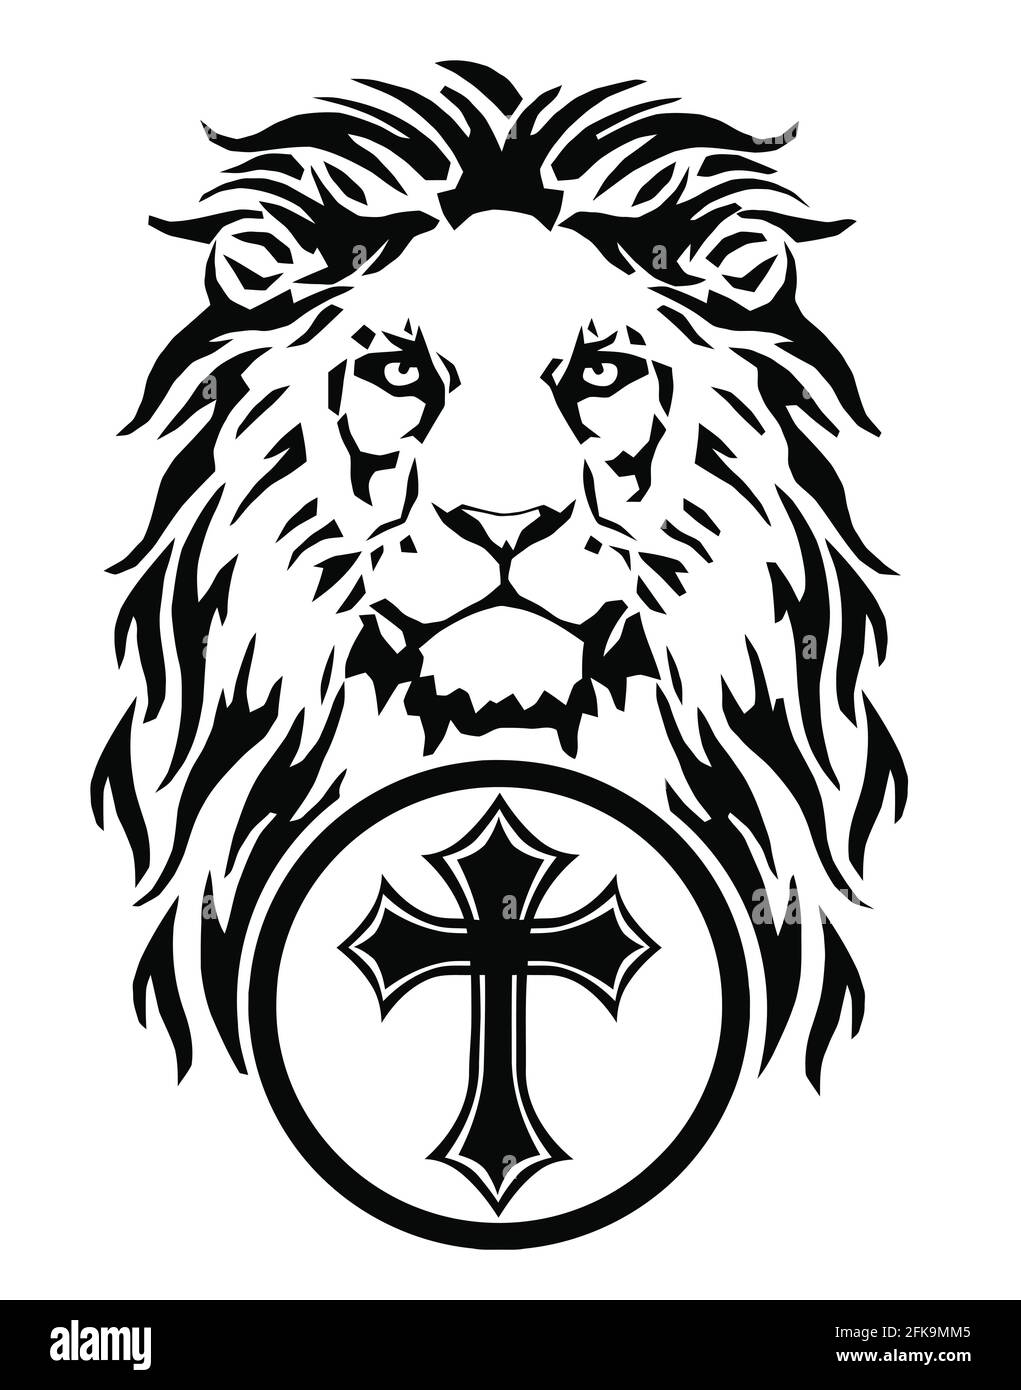 The Lion's head and the symbol of Christianity - the catholic cross, drawing for tattoo, on a white background, illustration, black and white, vector Stock Vector